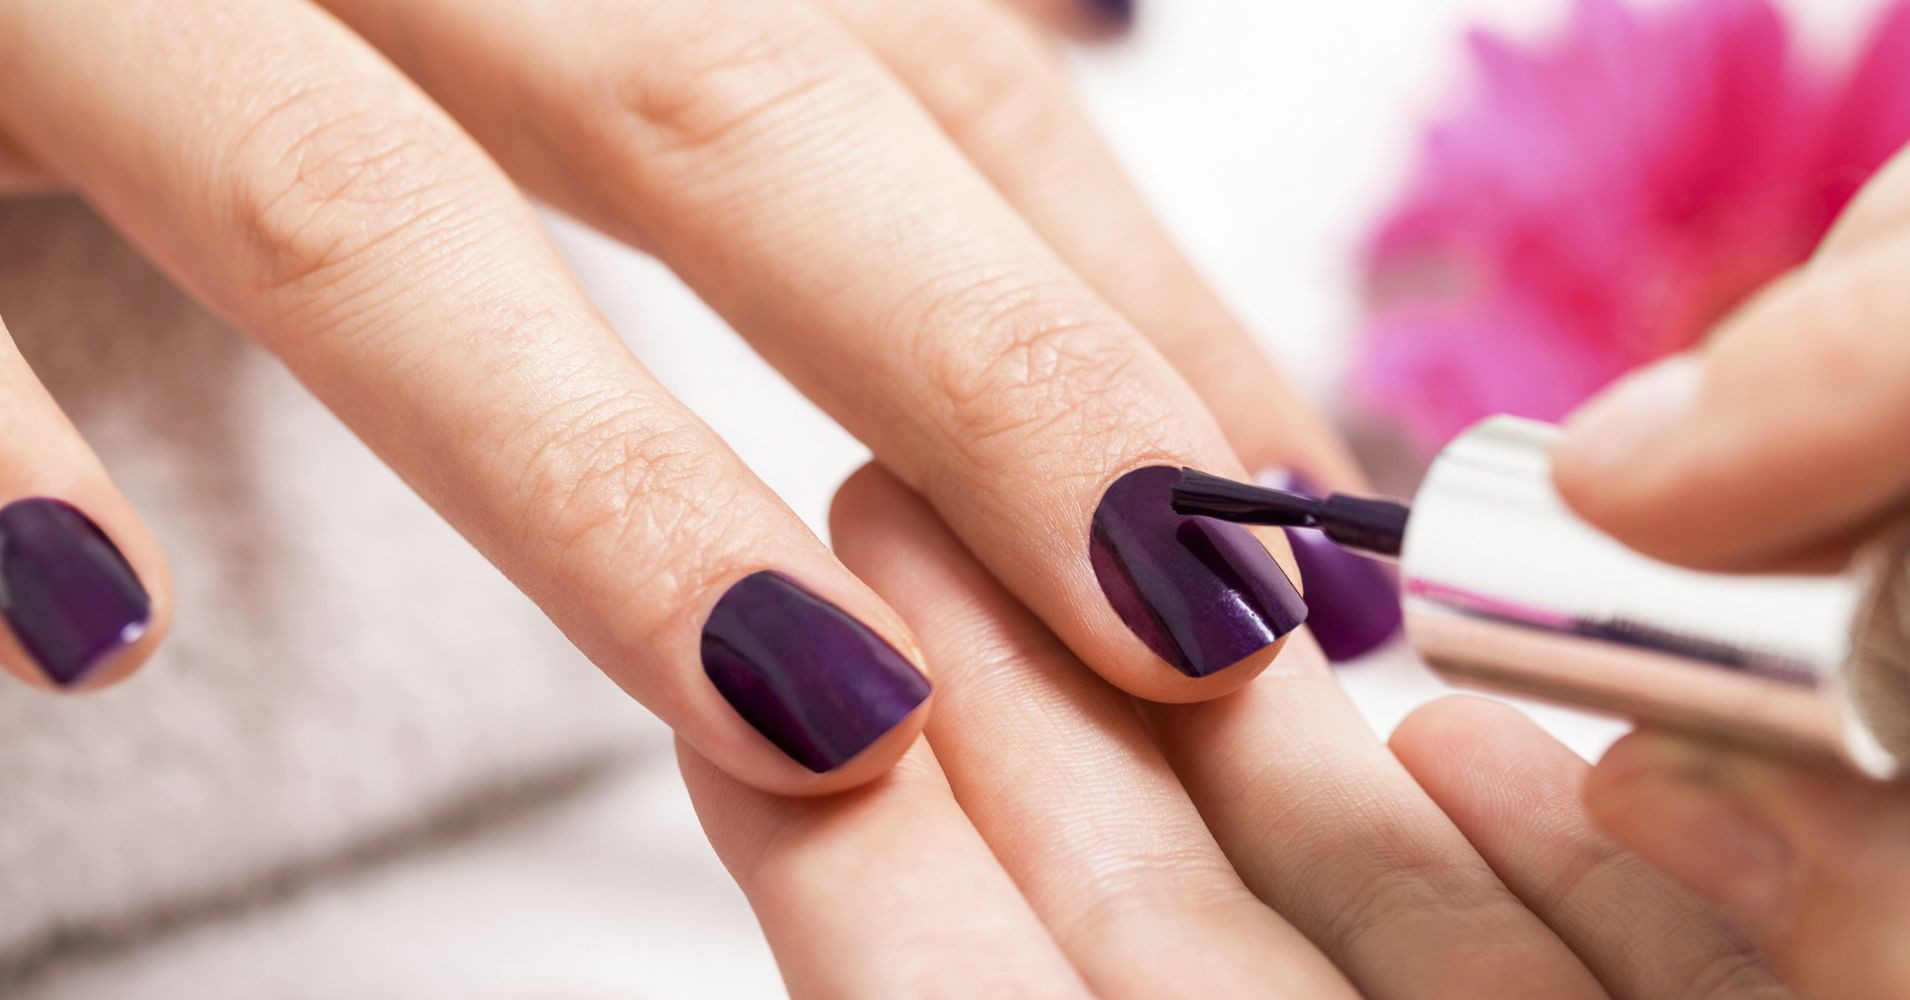 What Nail Colors Are In
 13 Dark Nail Polish Colors To Try That Aren t Black